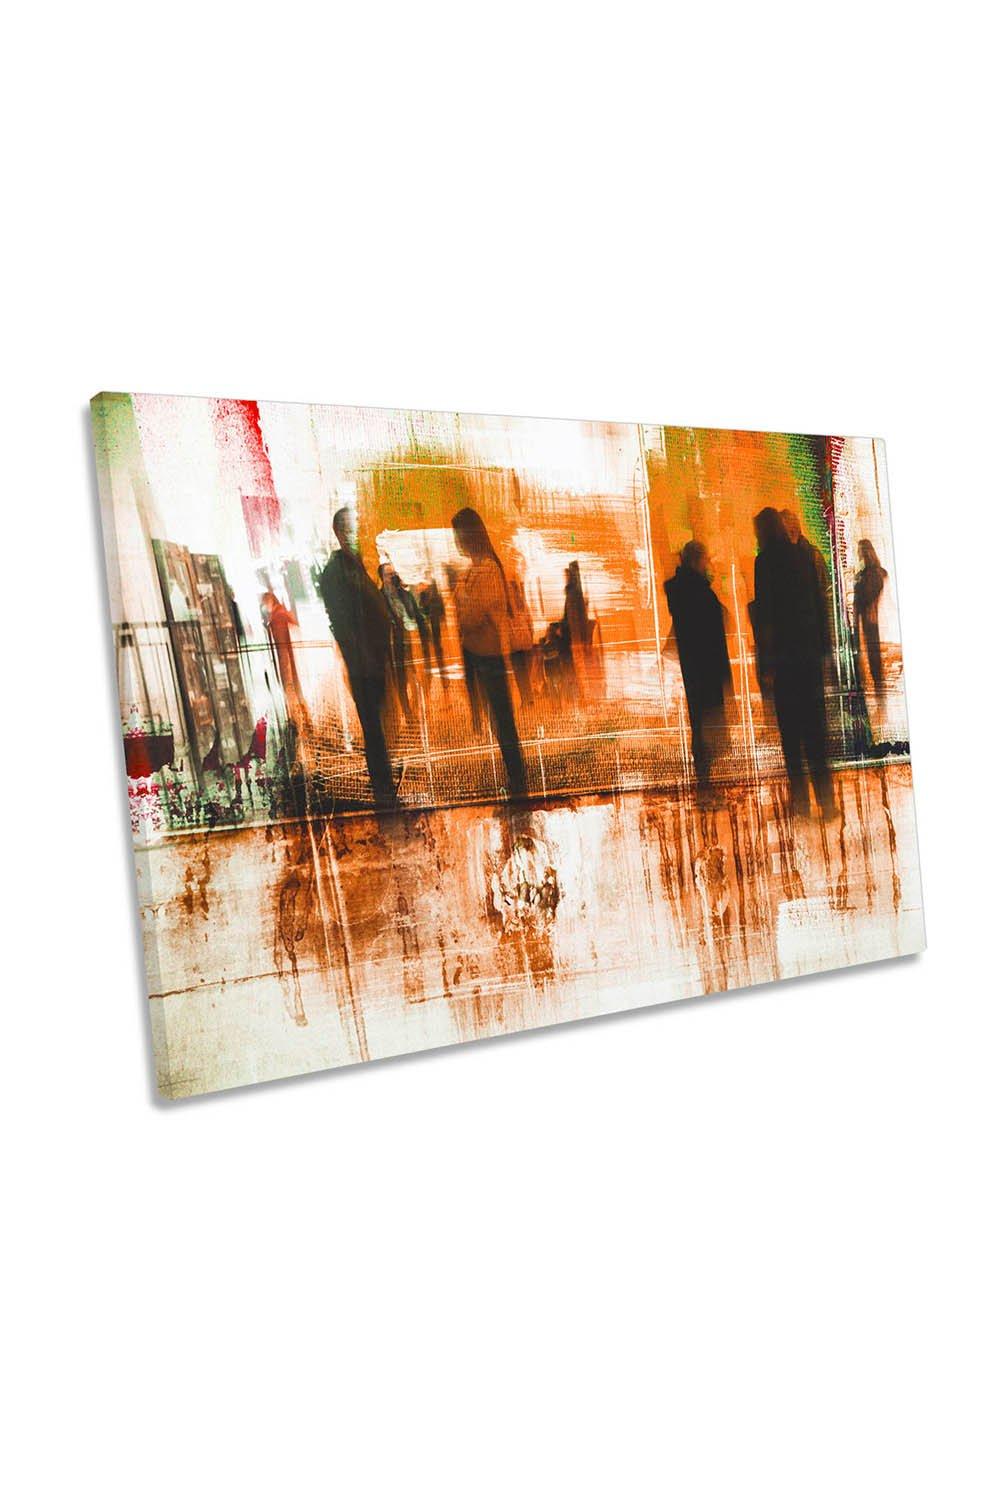 The Gathering Orange Abstract Canvas Wall Art Picture Print